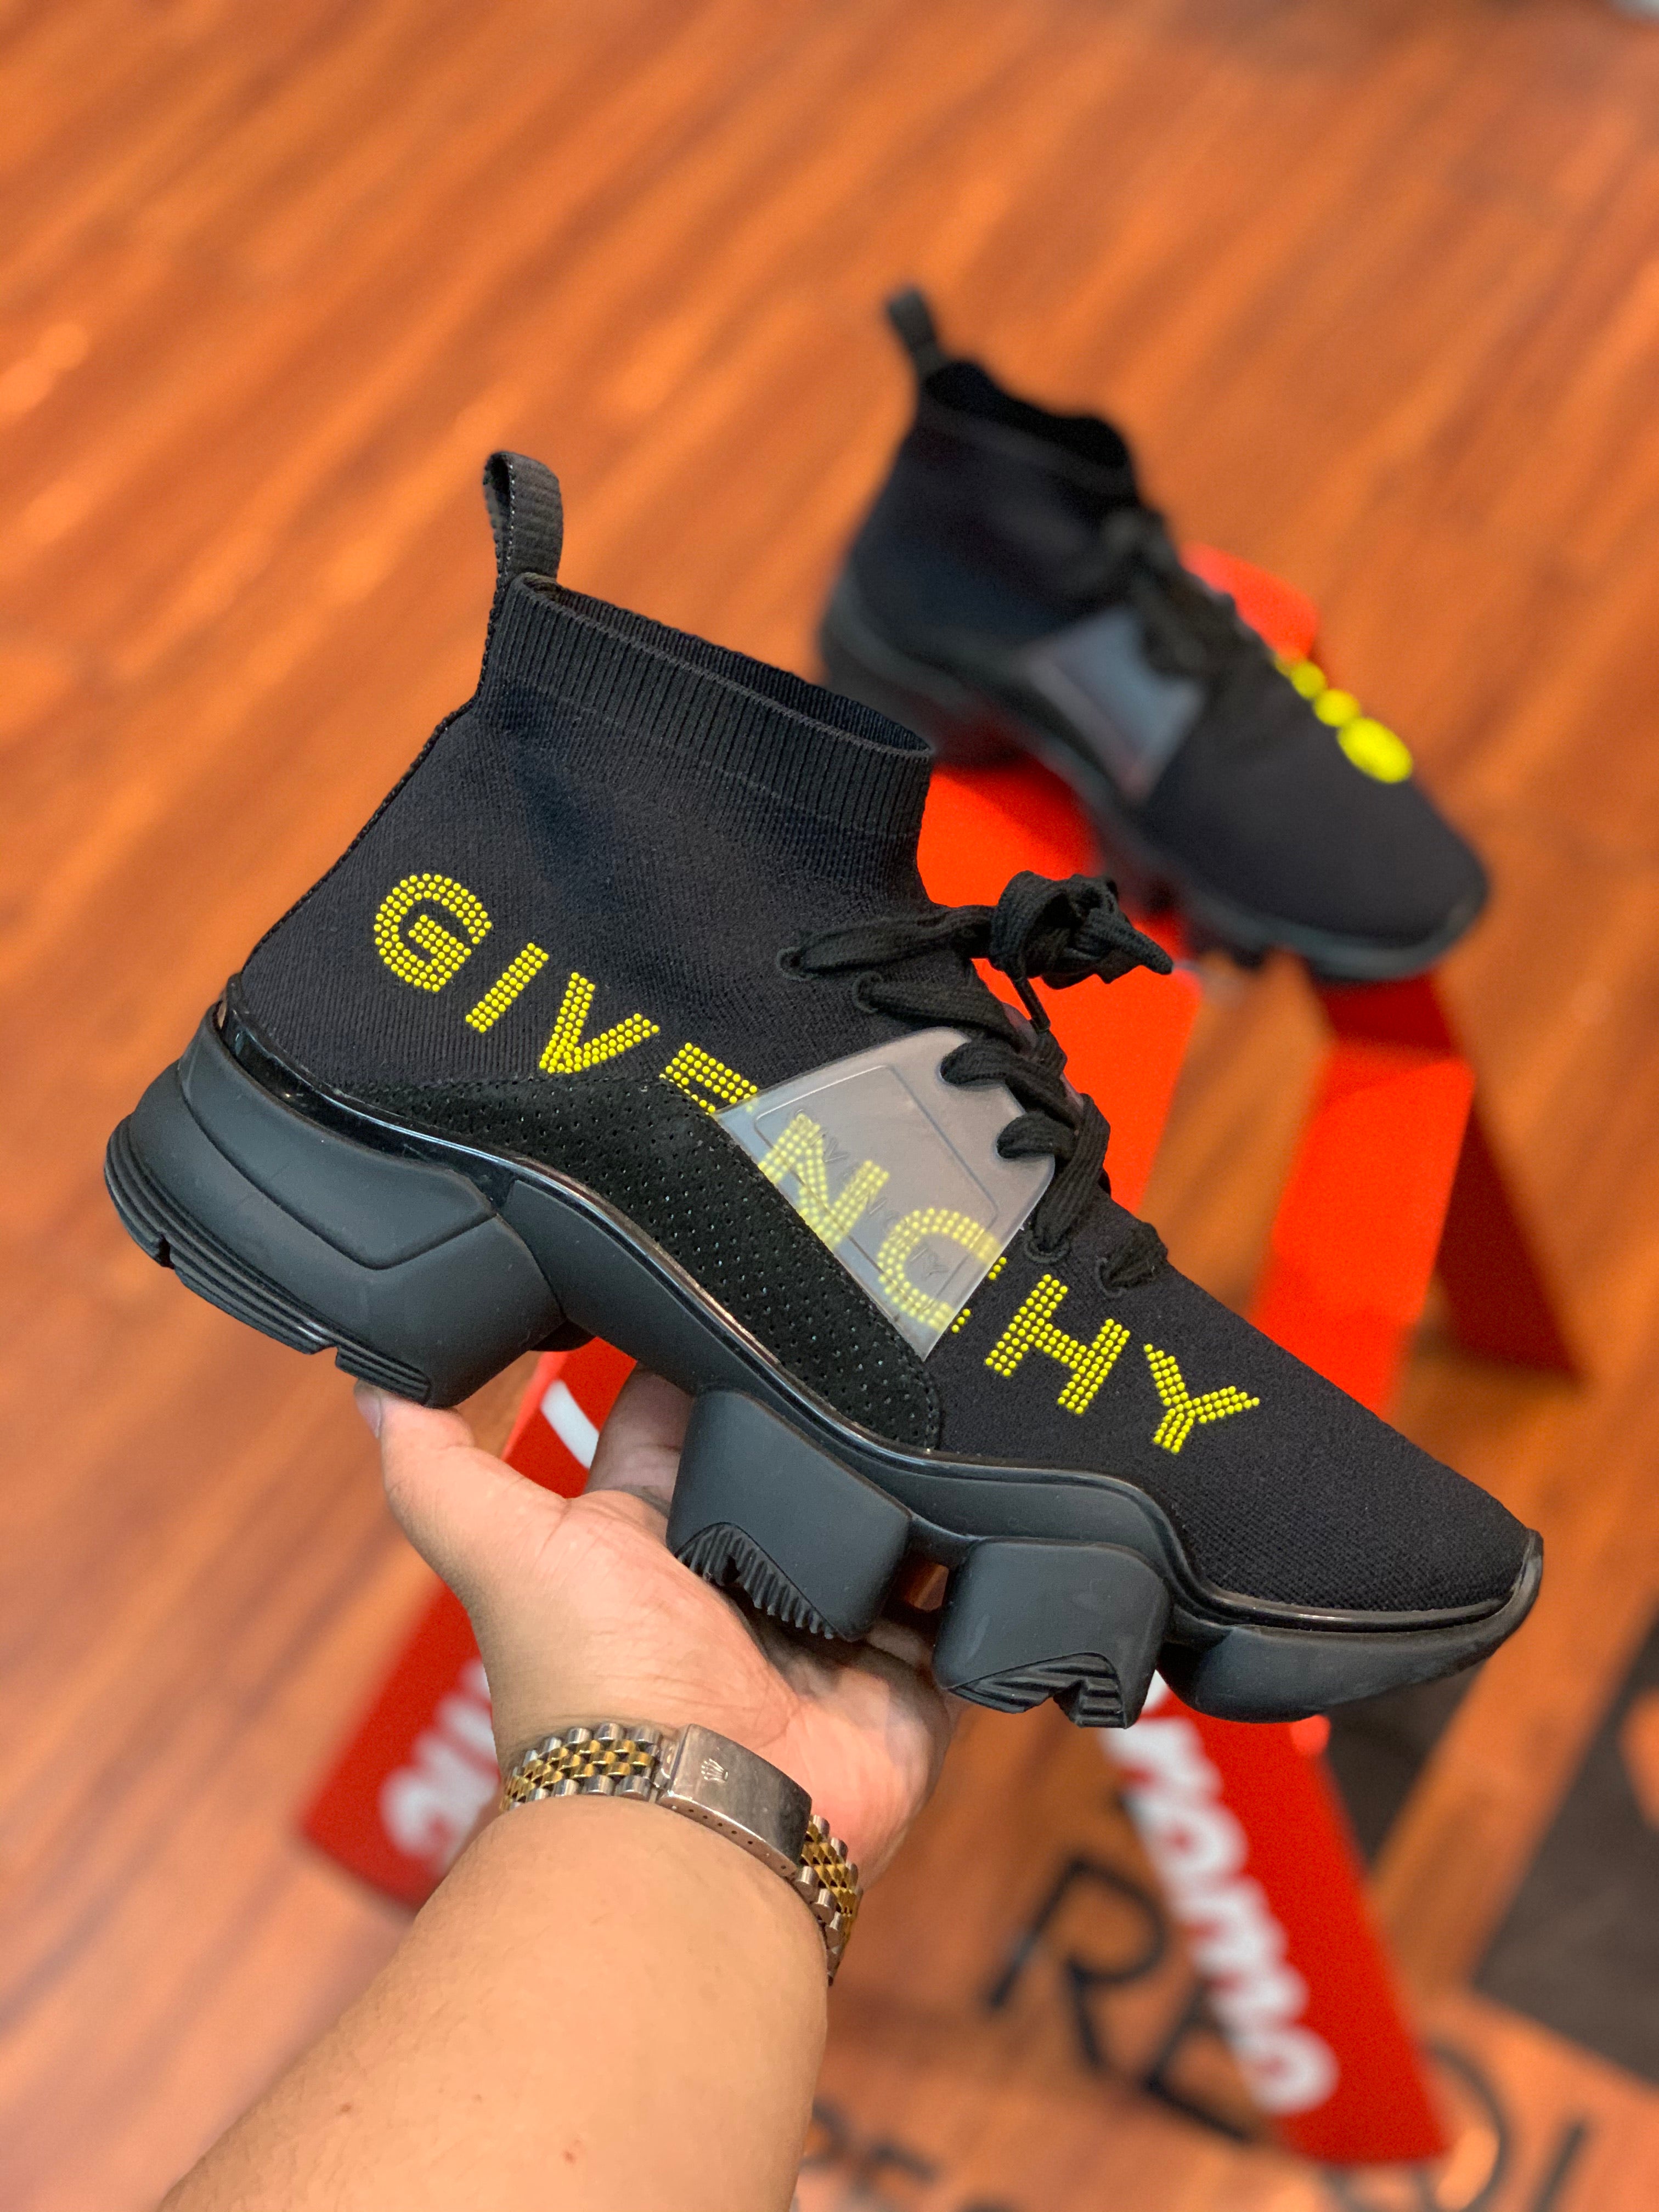 Givenchy Boot “Black & Yellow”